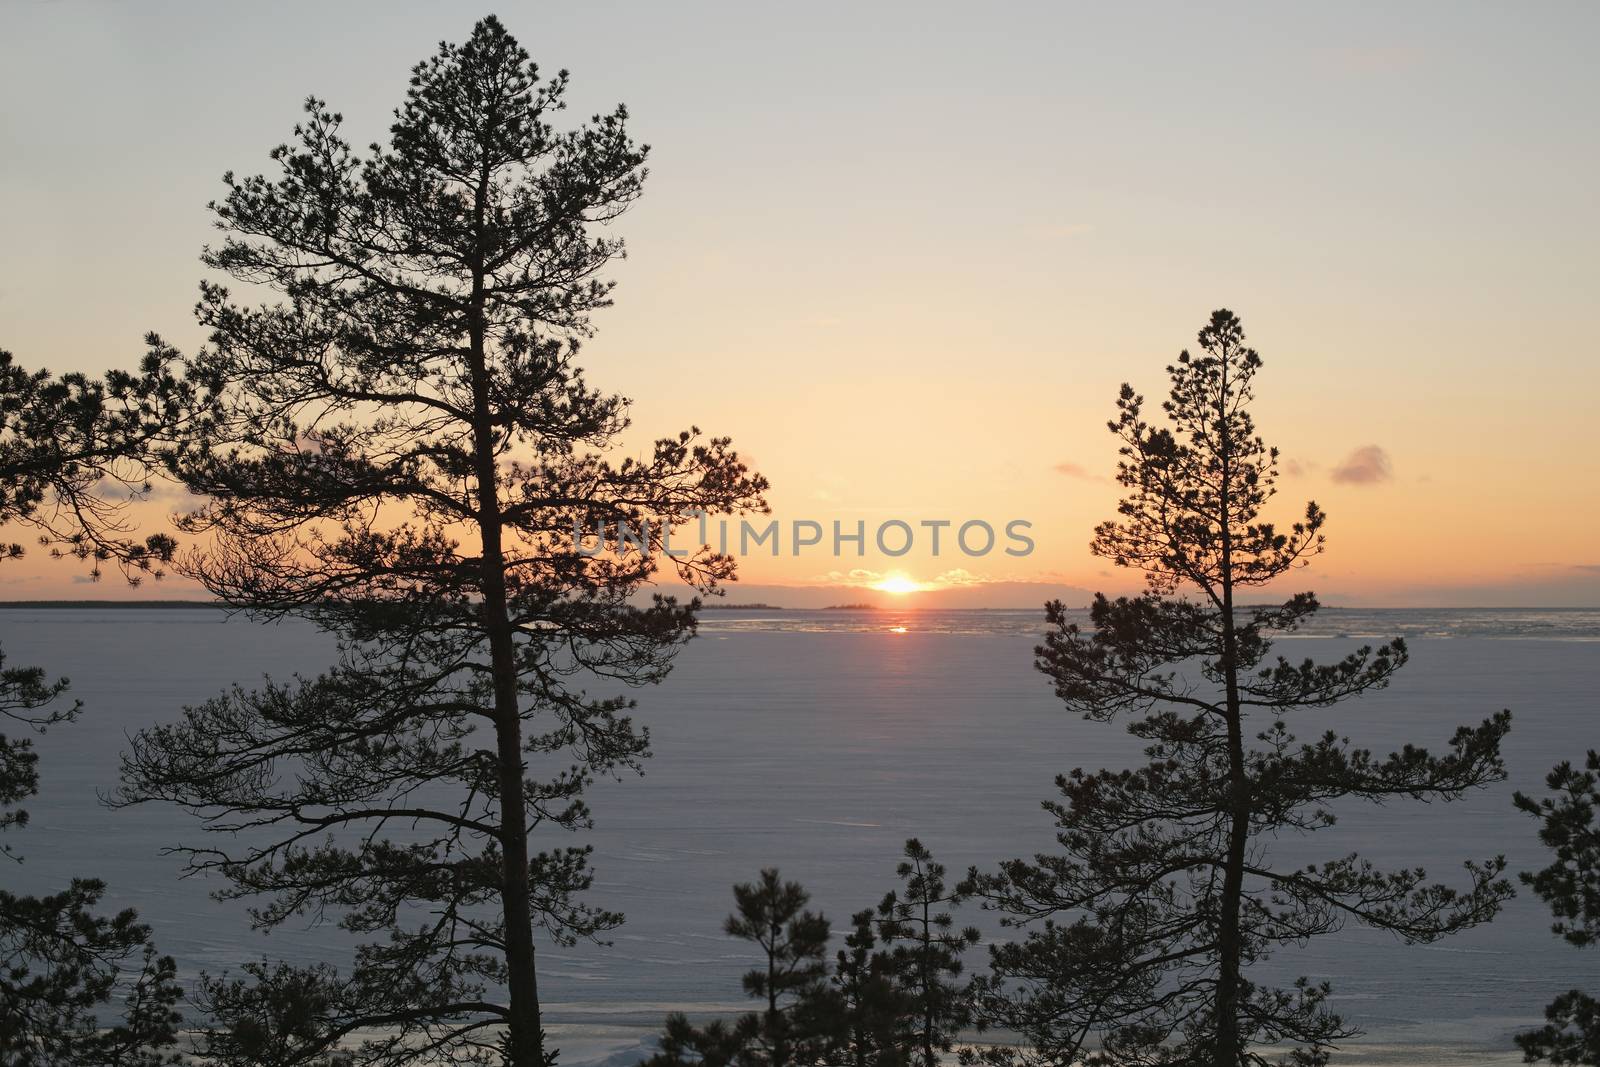 Arctic sea covered with ice, some pines in the foreground.